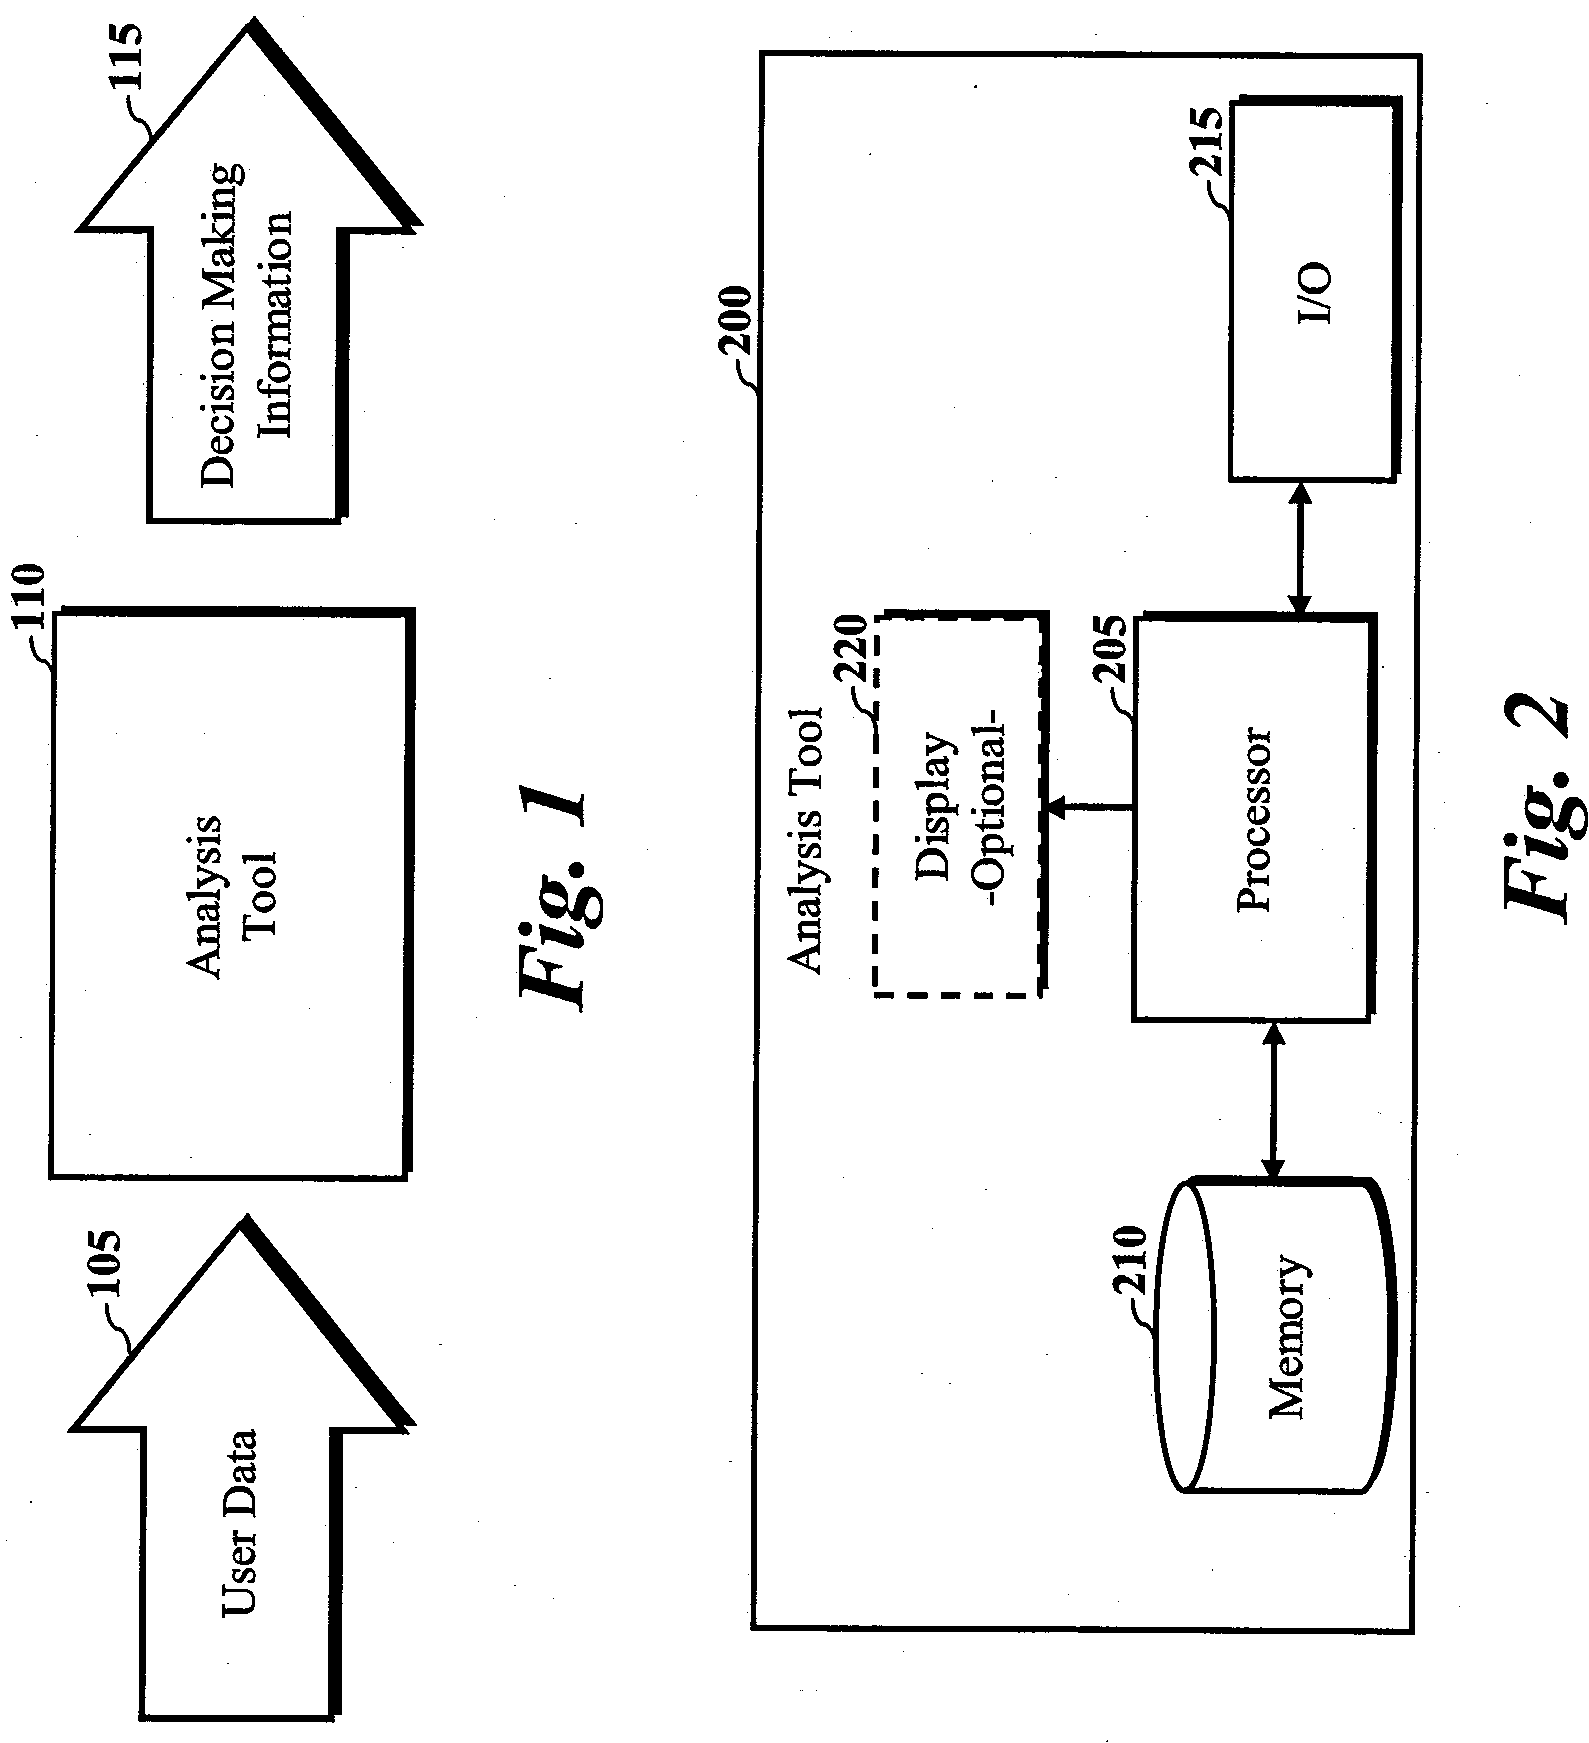 Method and Apparatus for Analyzing Data to Provide Decision Making Information